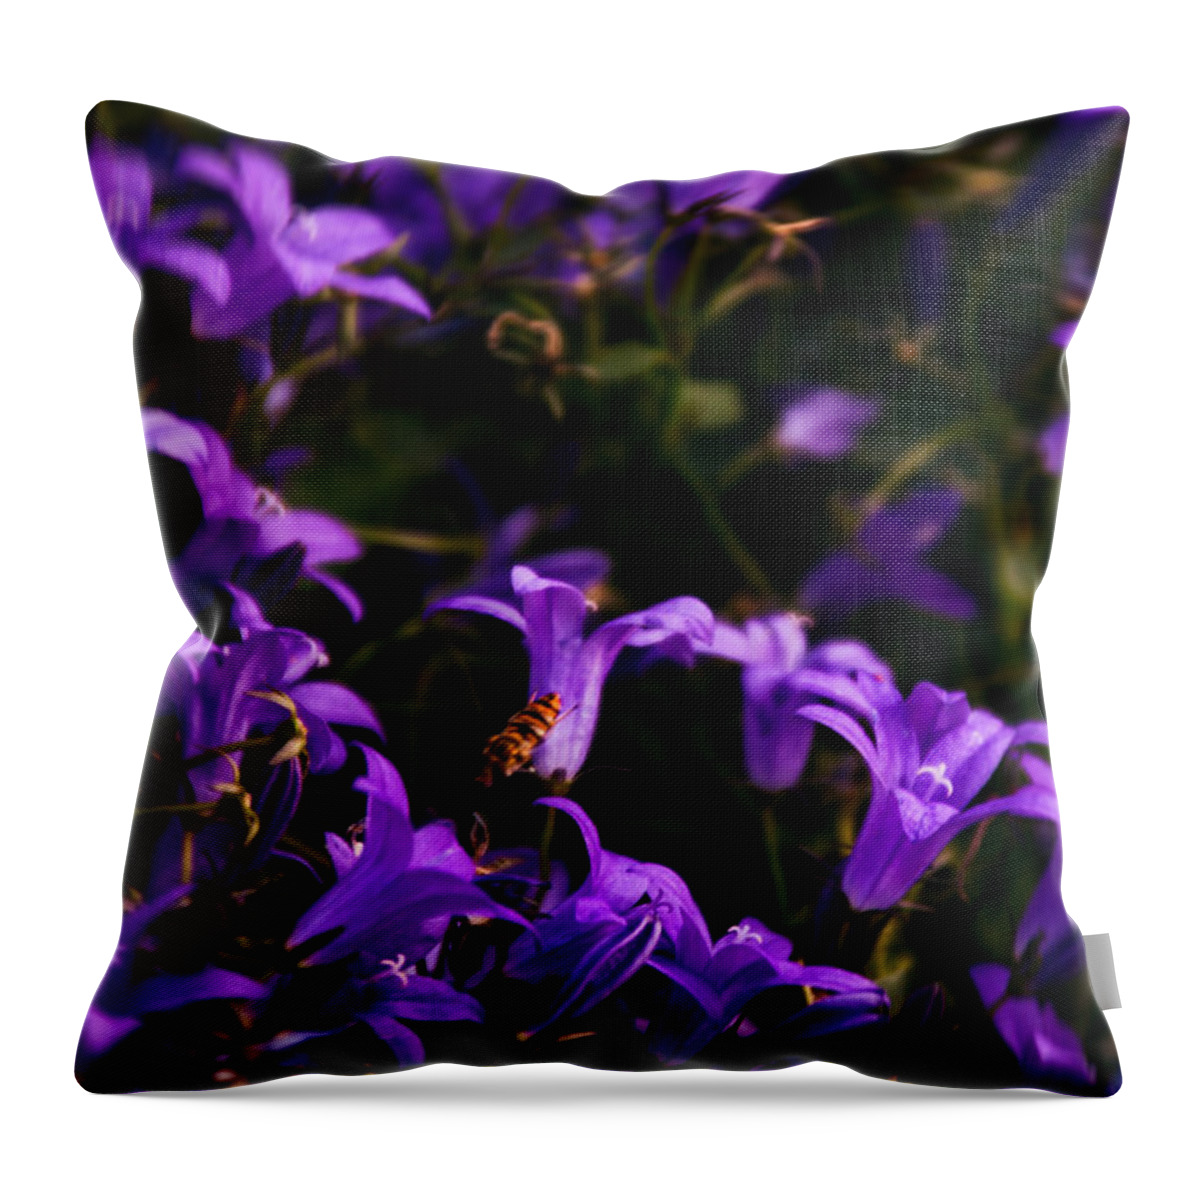  Throw Pillow featuring the photograph Purple Flowers by Manuel Parini